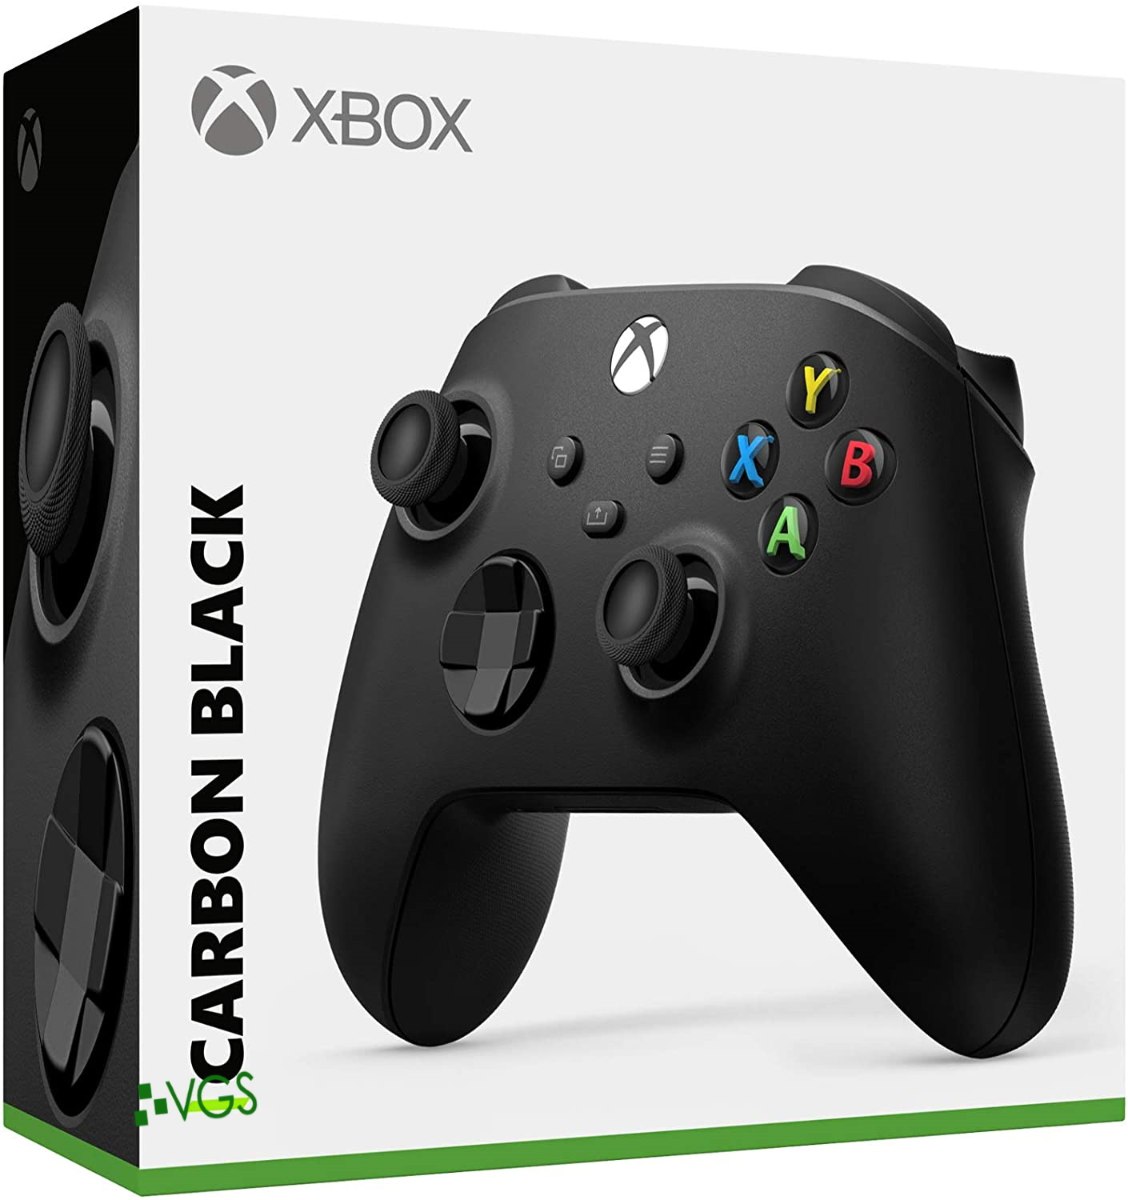 semester Road house Petitioner Xbox Series X / S Wireless Controller – Carbon Black שלט / בקר ל אקס בוקס X